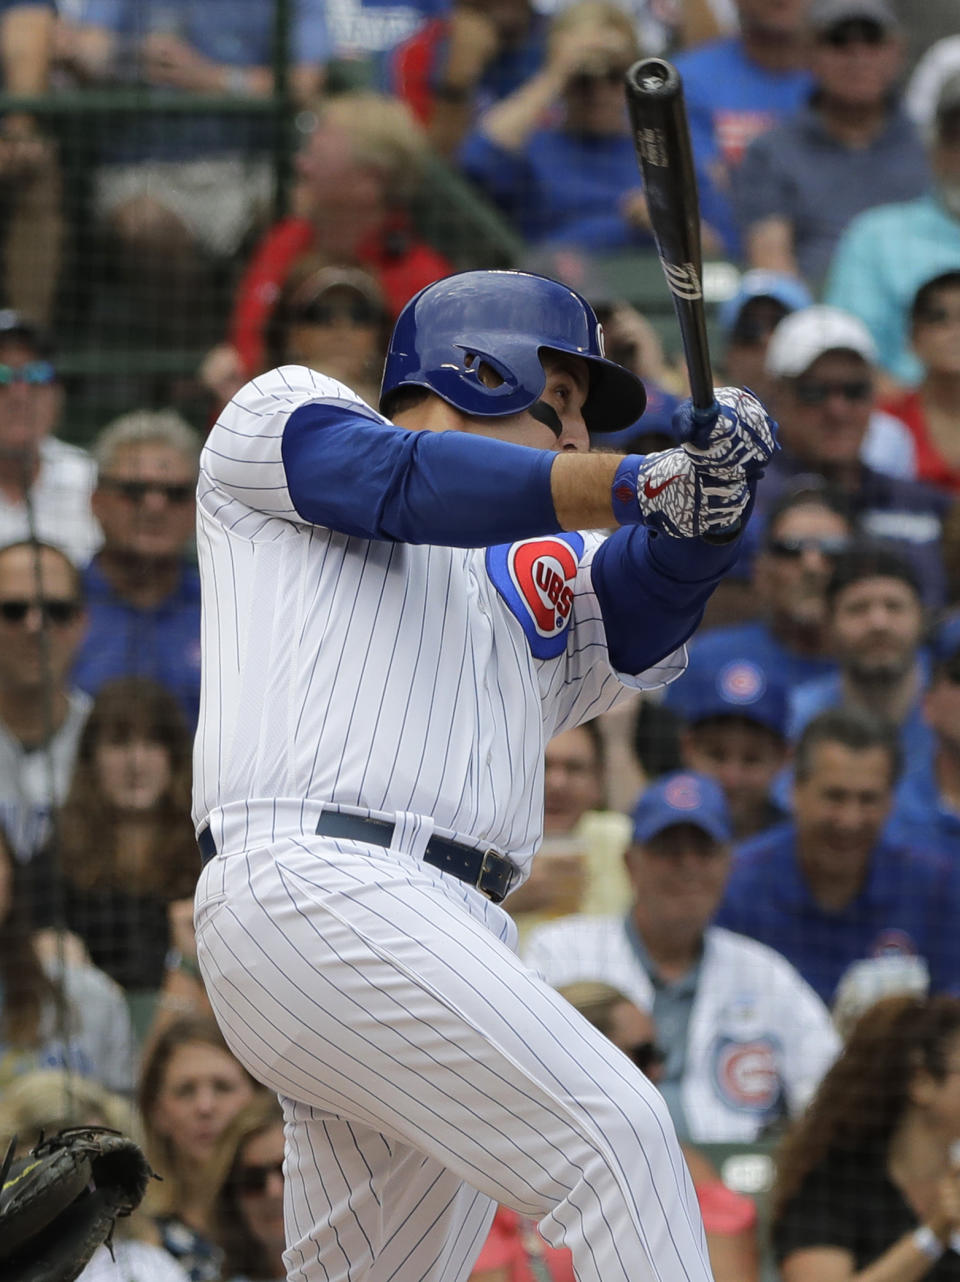 Chicago Cubs' Anthony Rizzo hits a two-run home run against the Milwaukee Brewers during the first inning of a baseball game Wednesday, Aug. 15, 2018, in Chicago. (AP Photo/Nam Y. Huh)